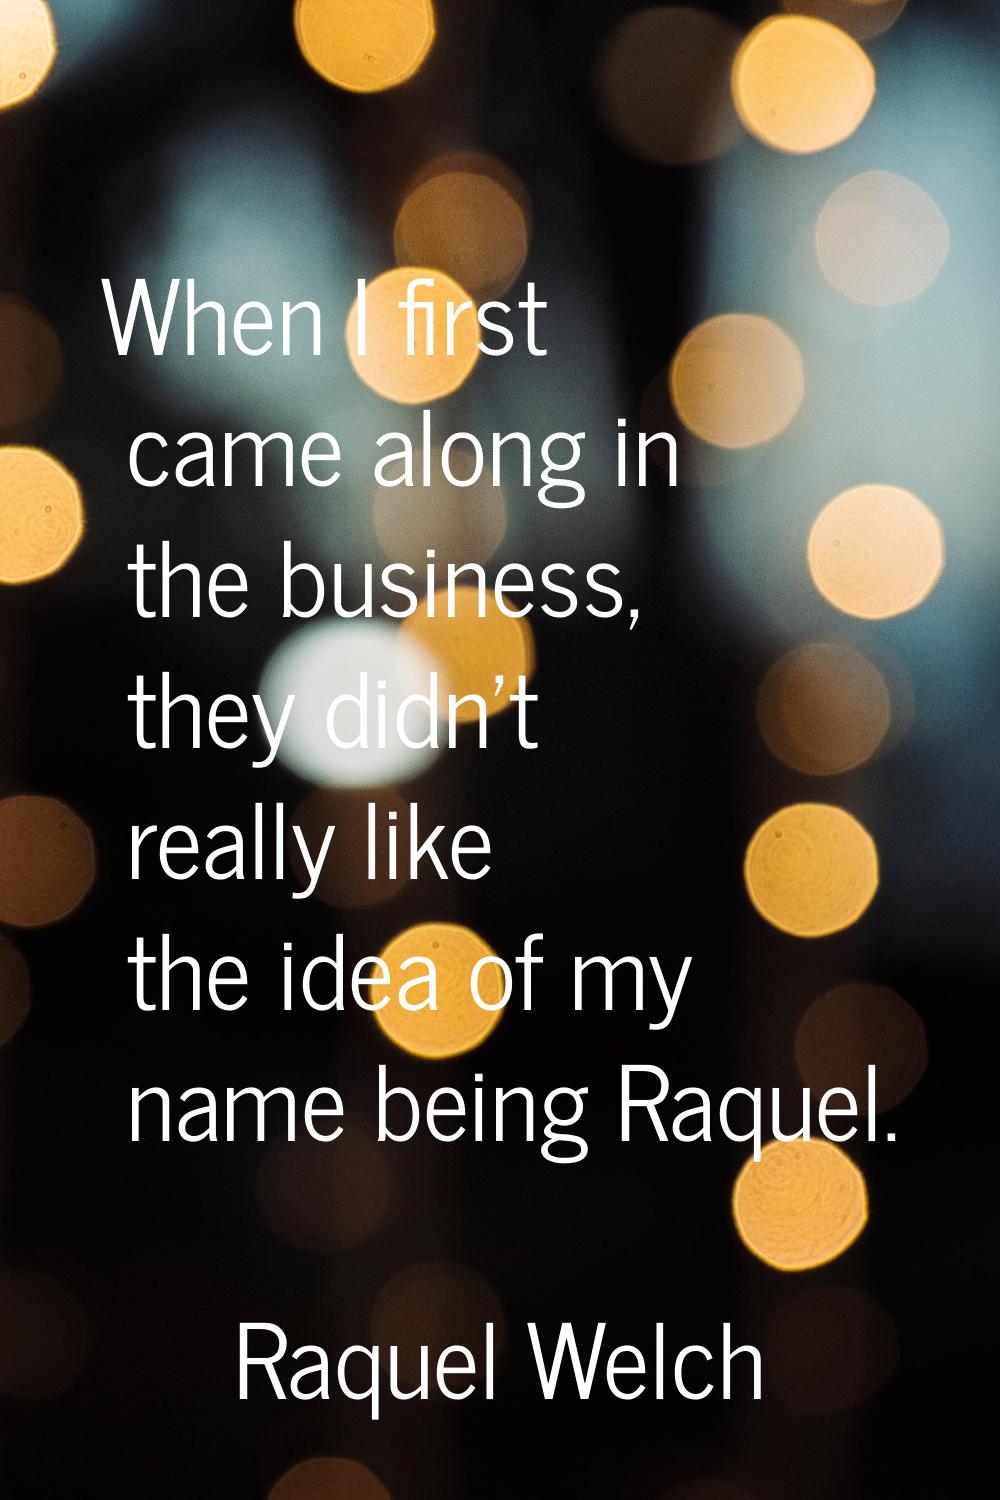 When I first came along in the business, they didn't really like the idea of my name being Raquel.